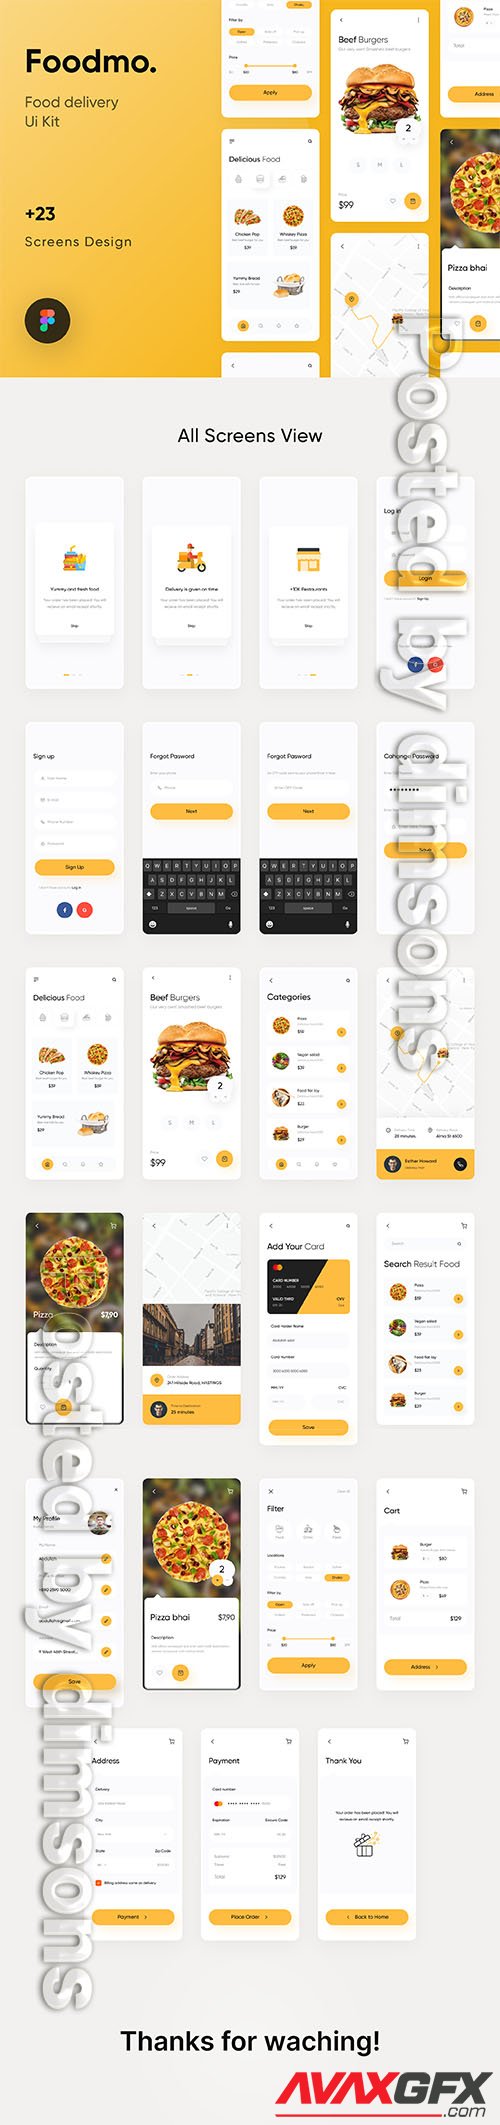 Foodmo - Food Delivery App